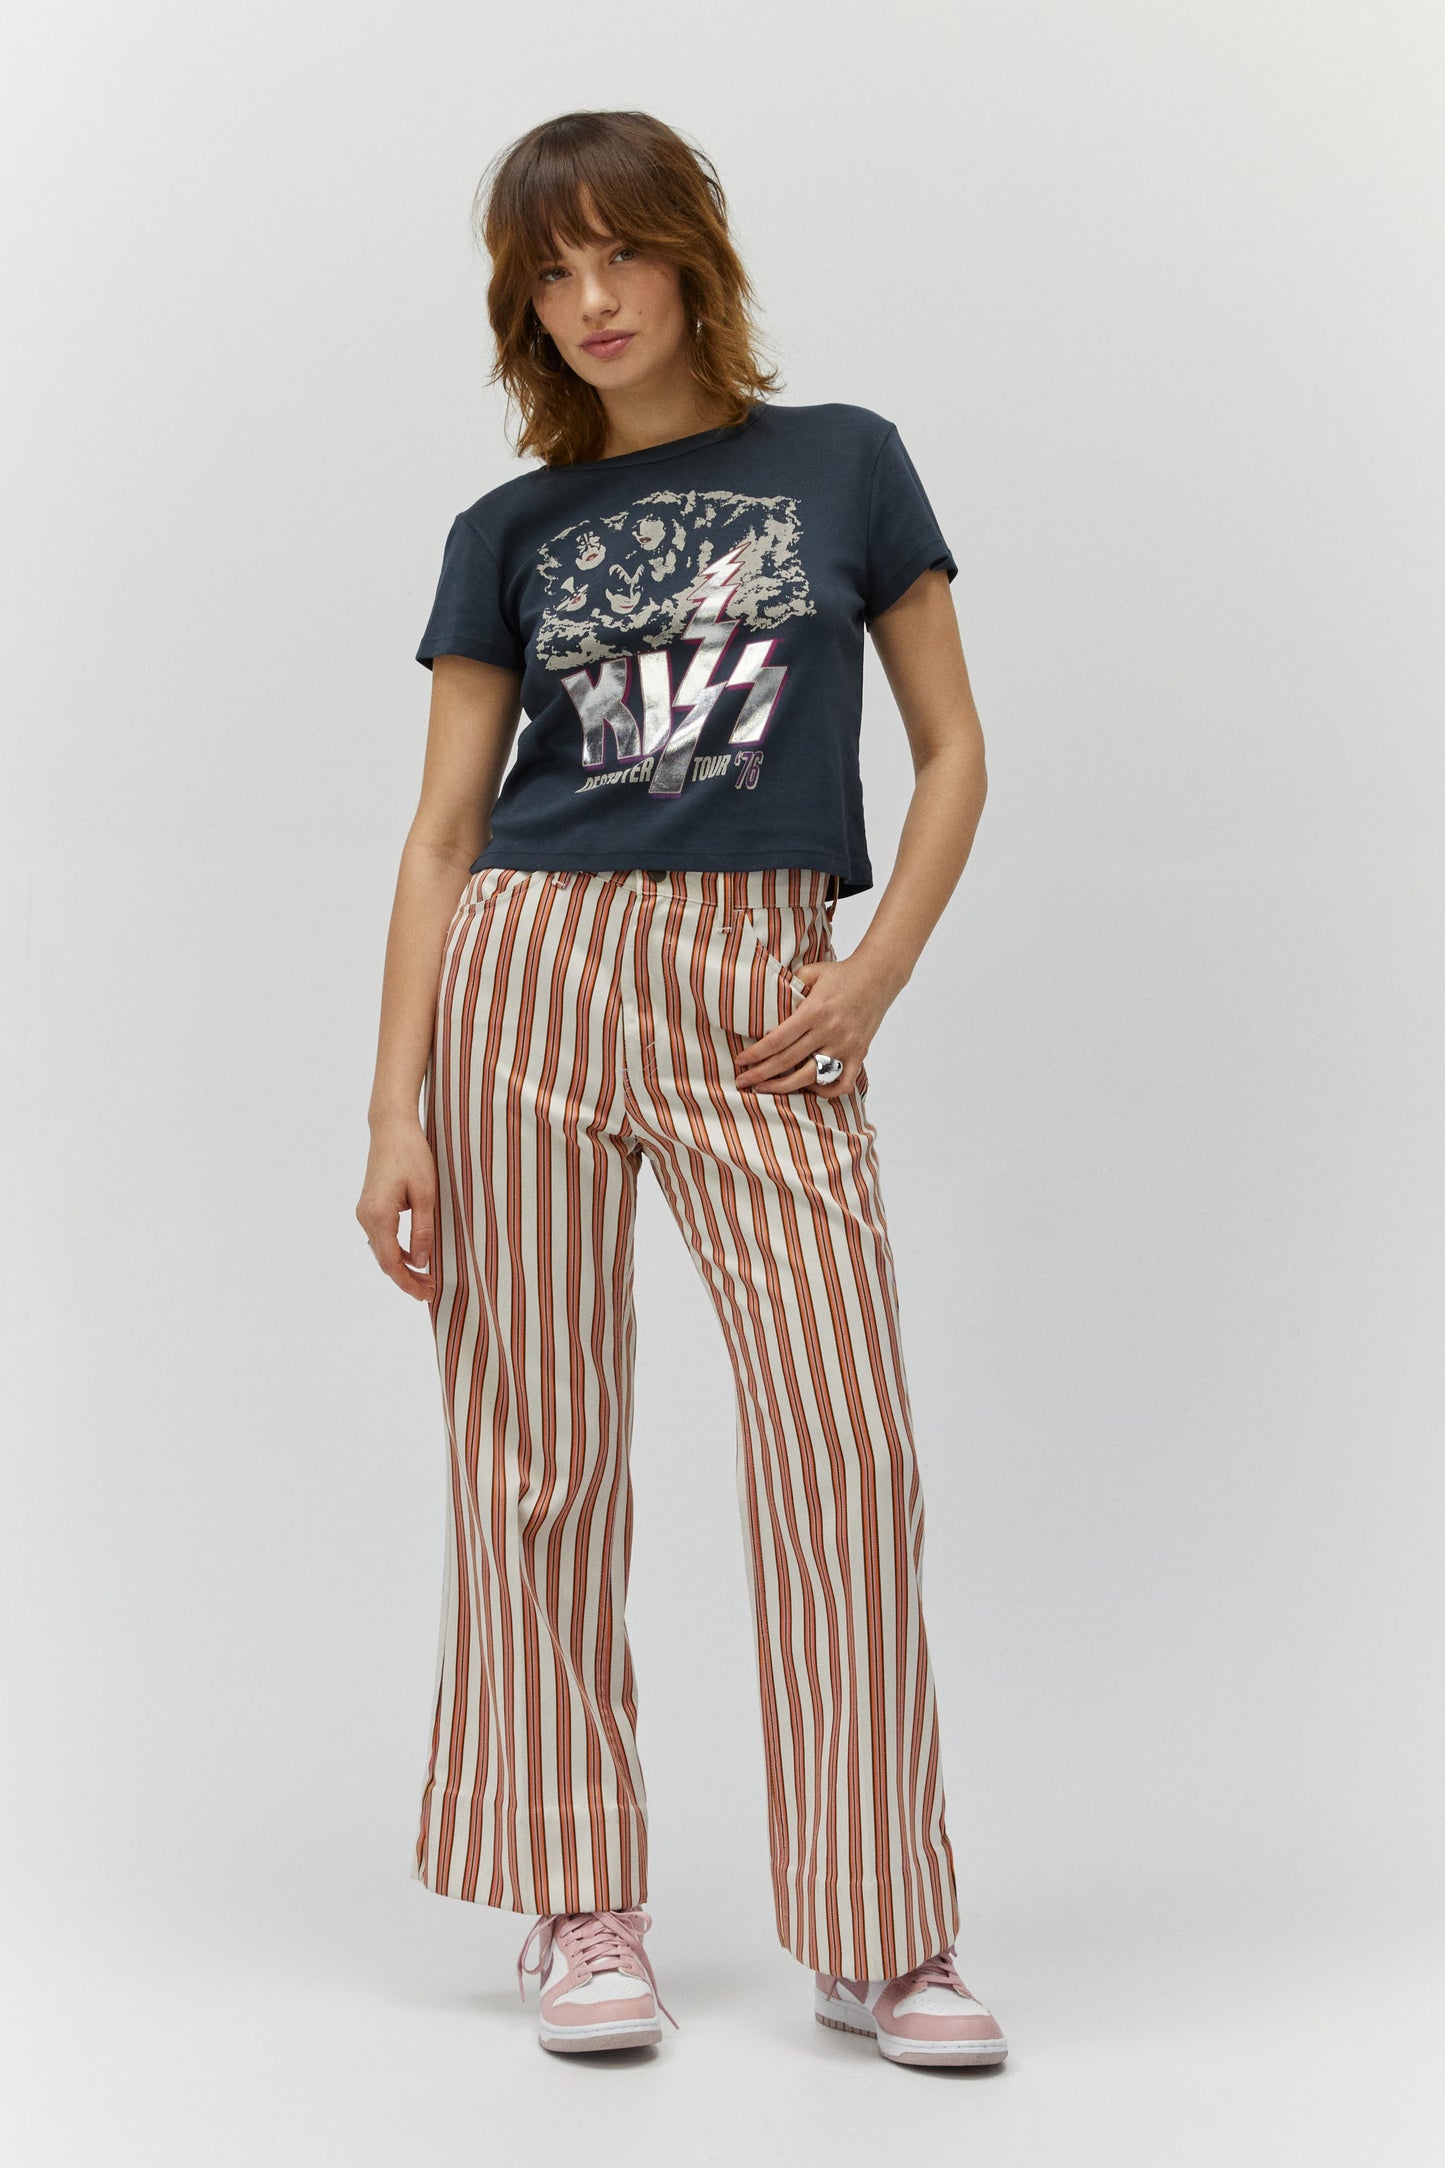 kiss tee with striped pants